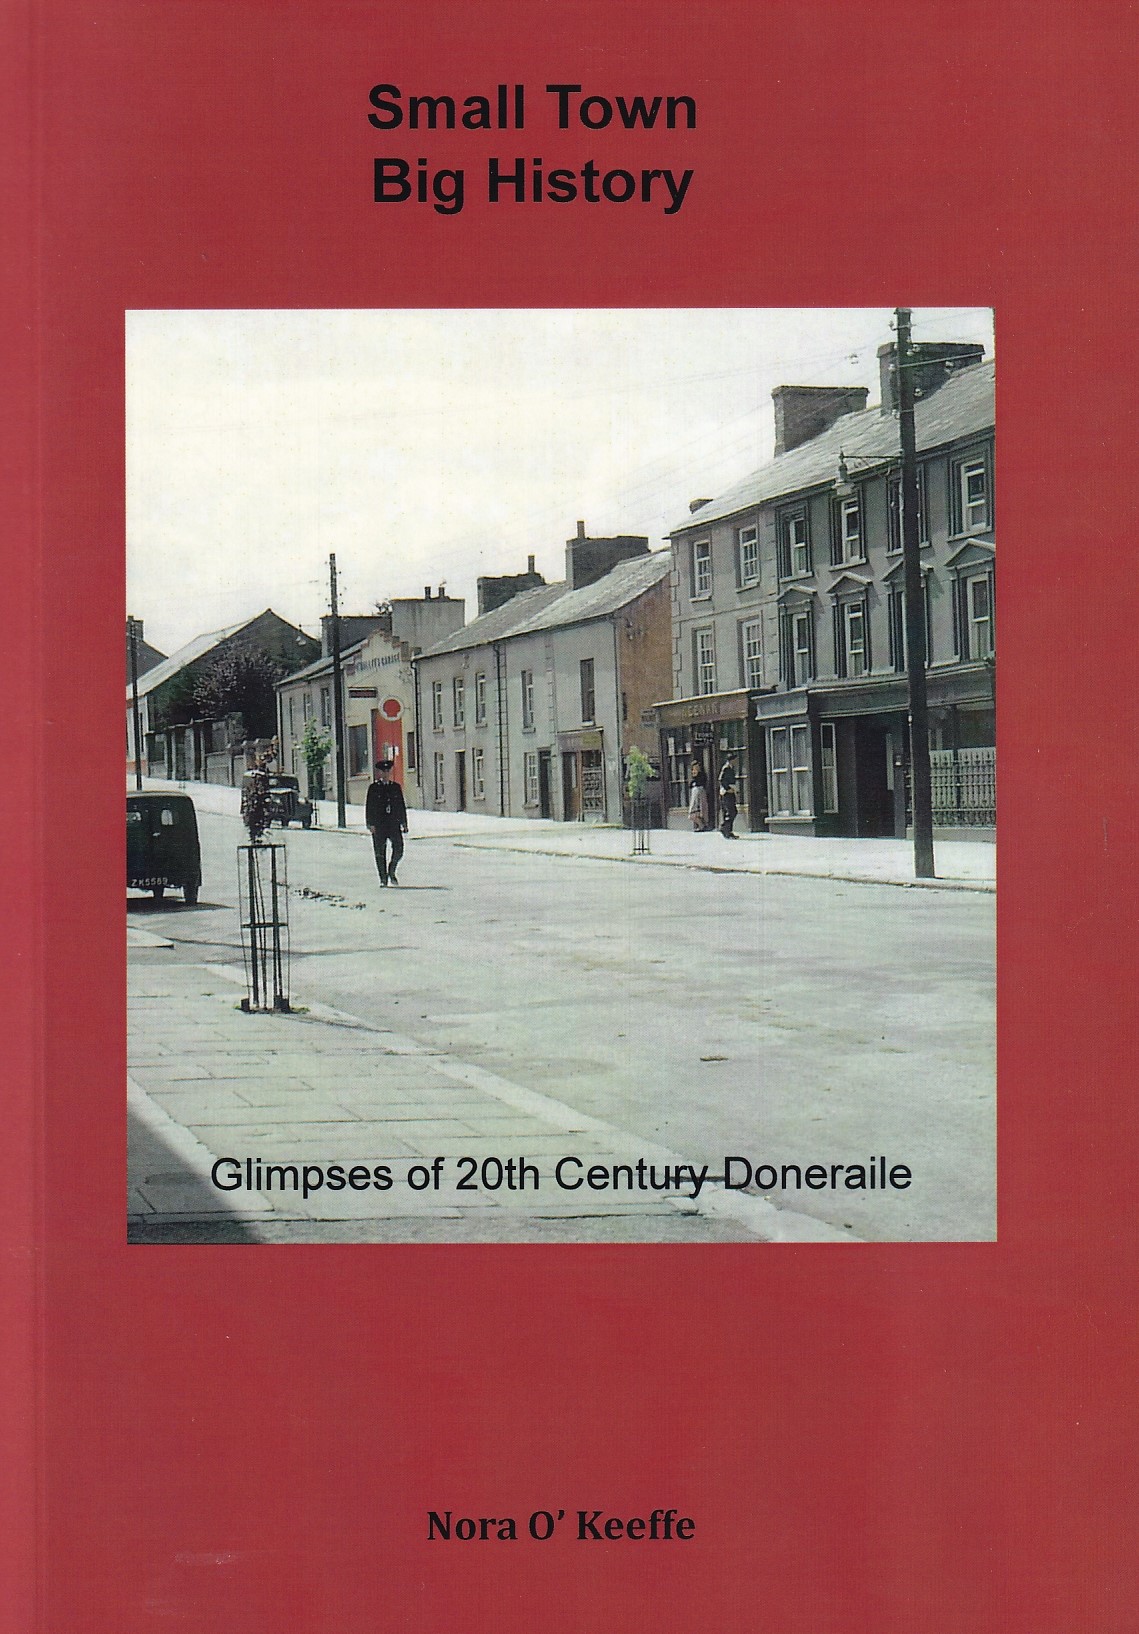 Small Town Big History: Glimpses of 20th Century Doneraile [Signed] | Nora O'Keeffe | Charlie Byrne's